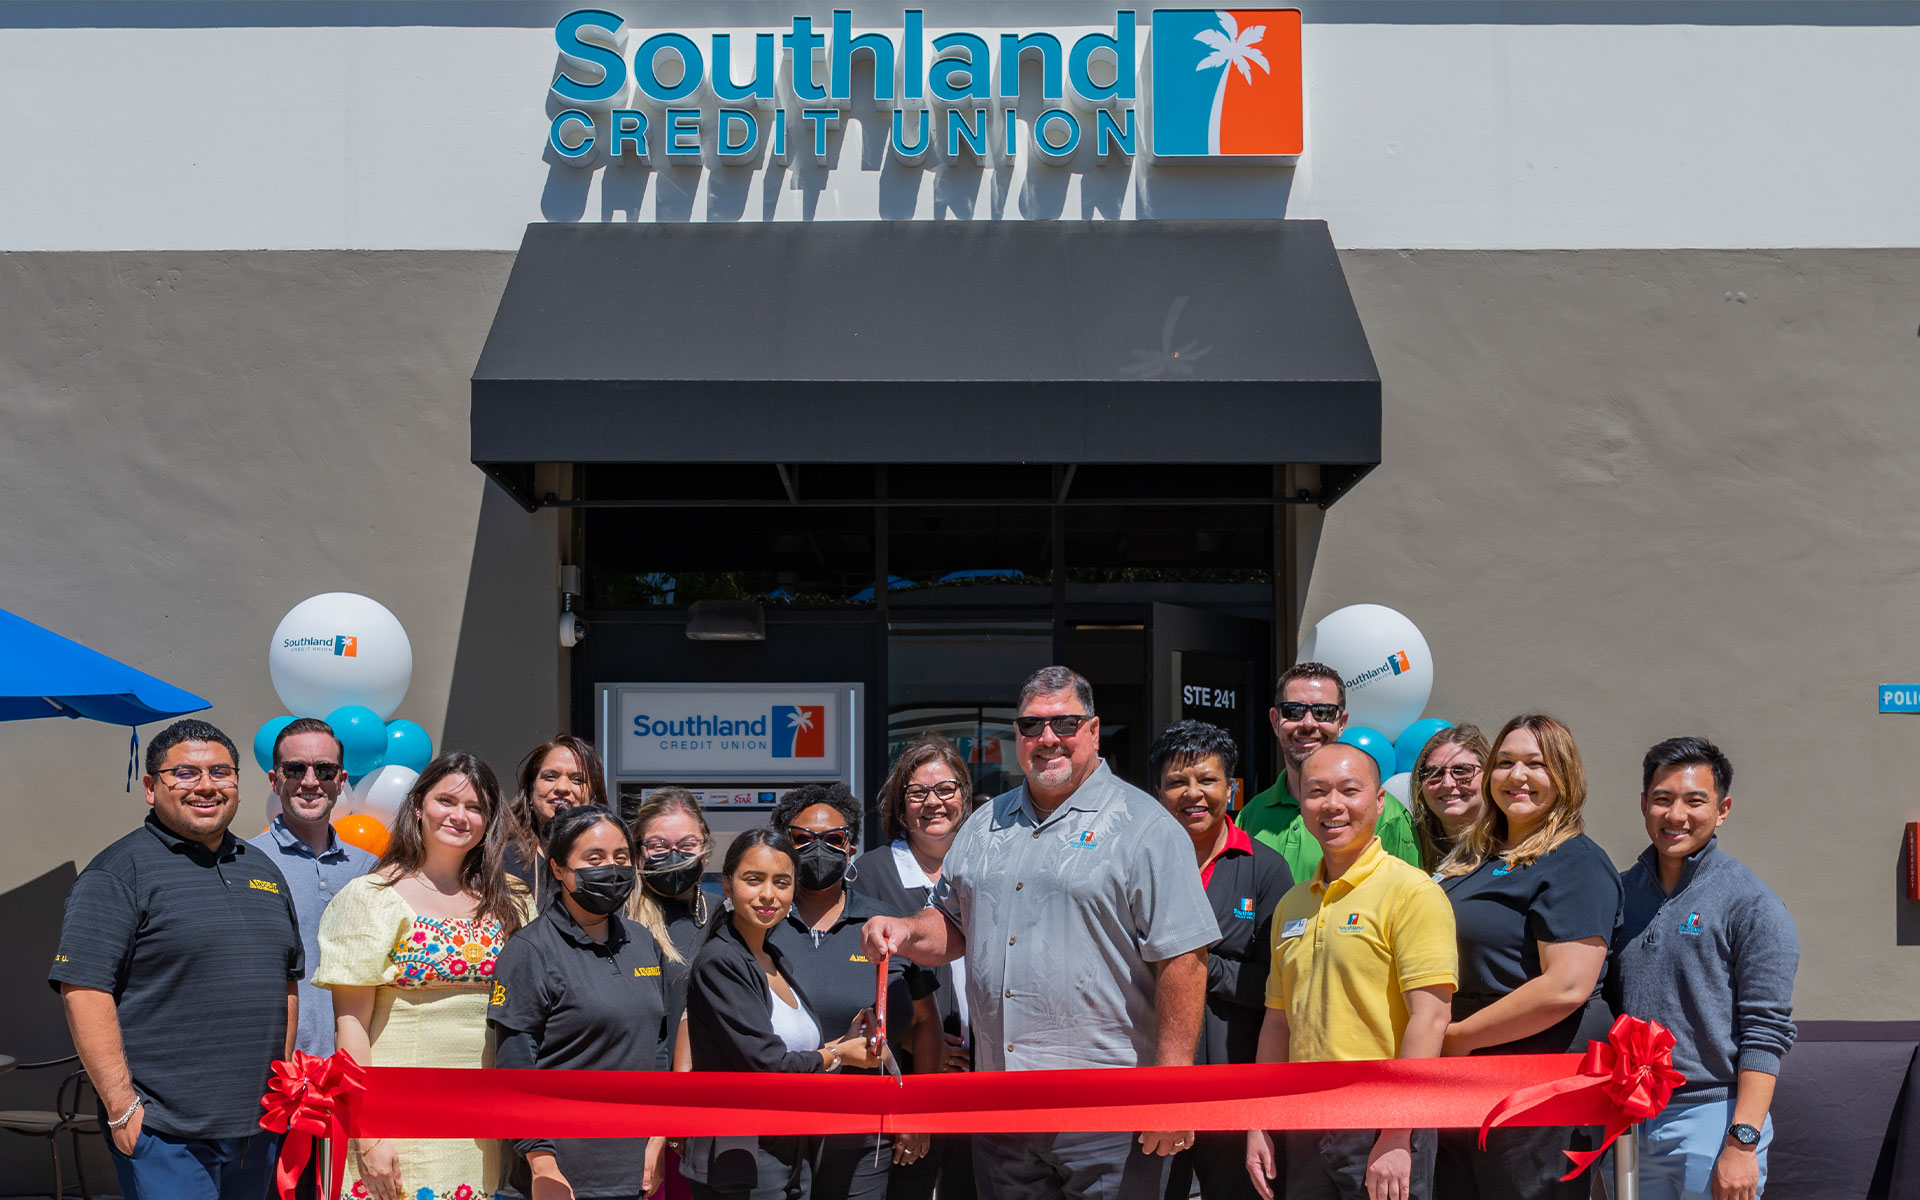 Southland Credit Union